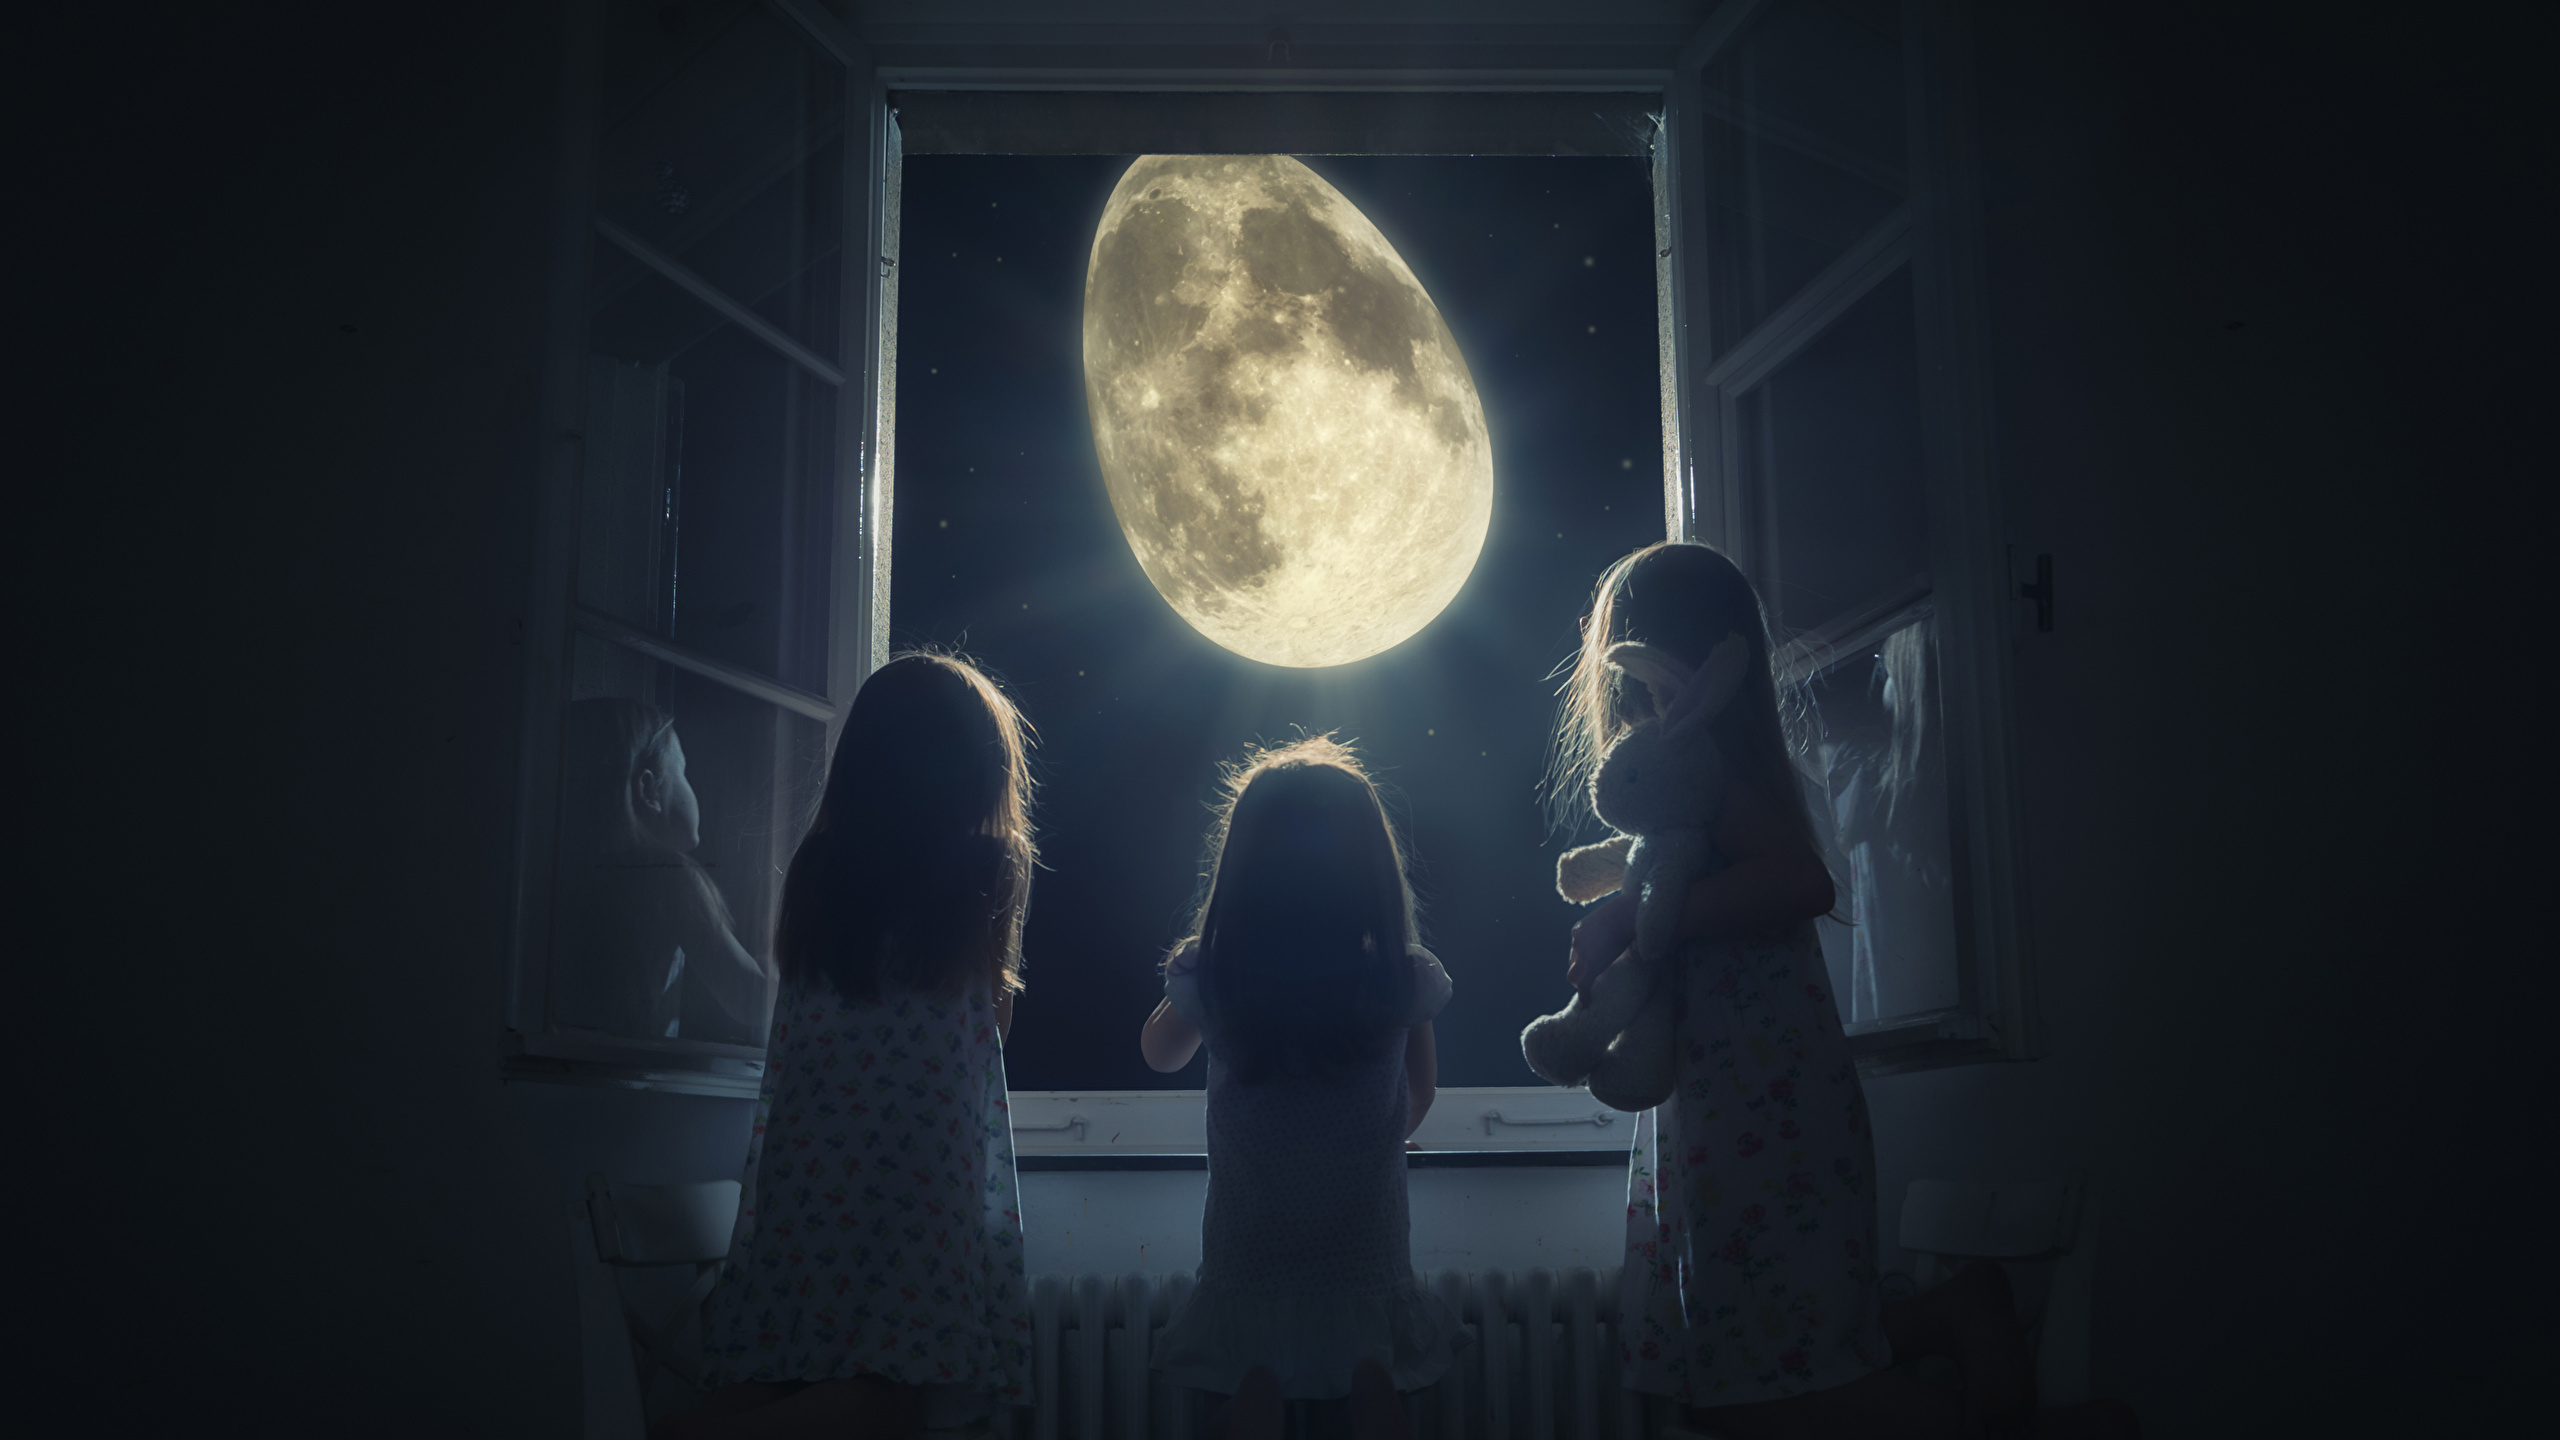 Artistic Night Sky And Moon Through Window Wallpapers